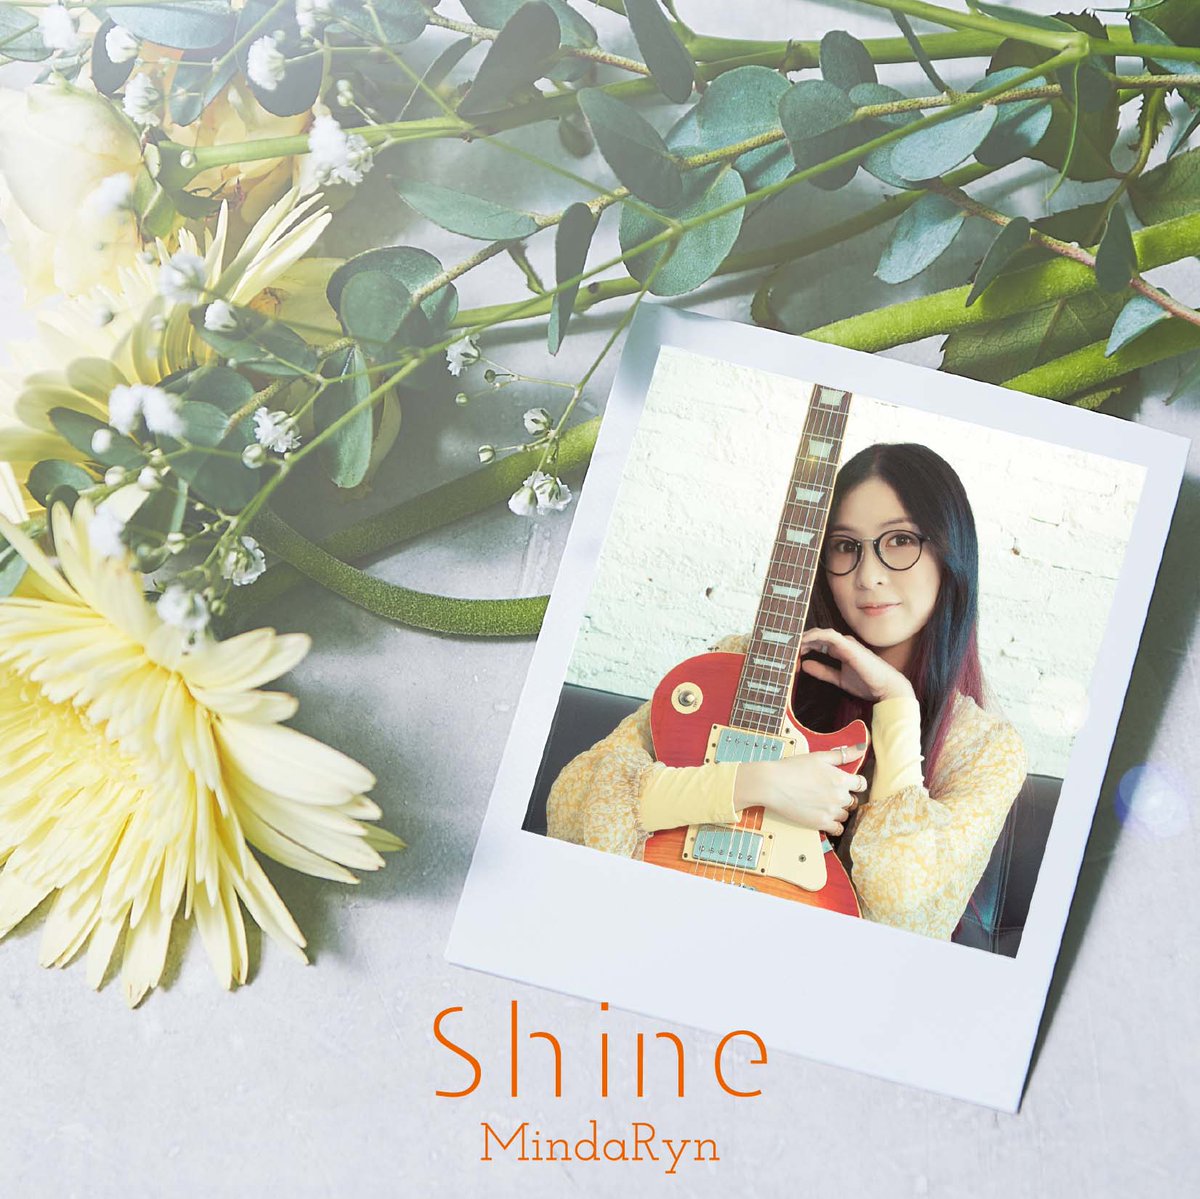 Cover art for『MindaRyn - Shine』from the release『Shine』